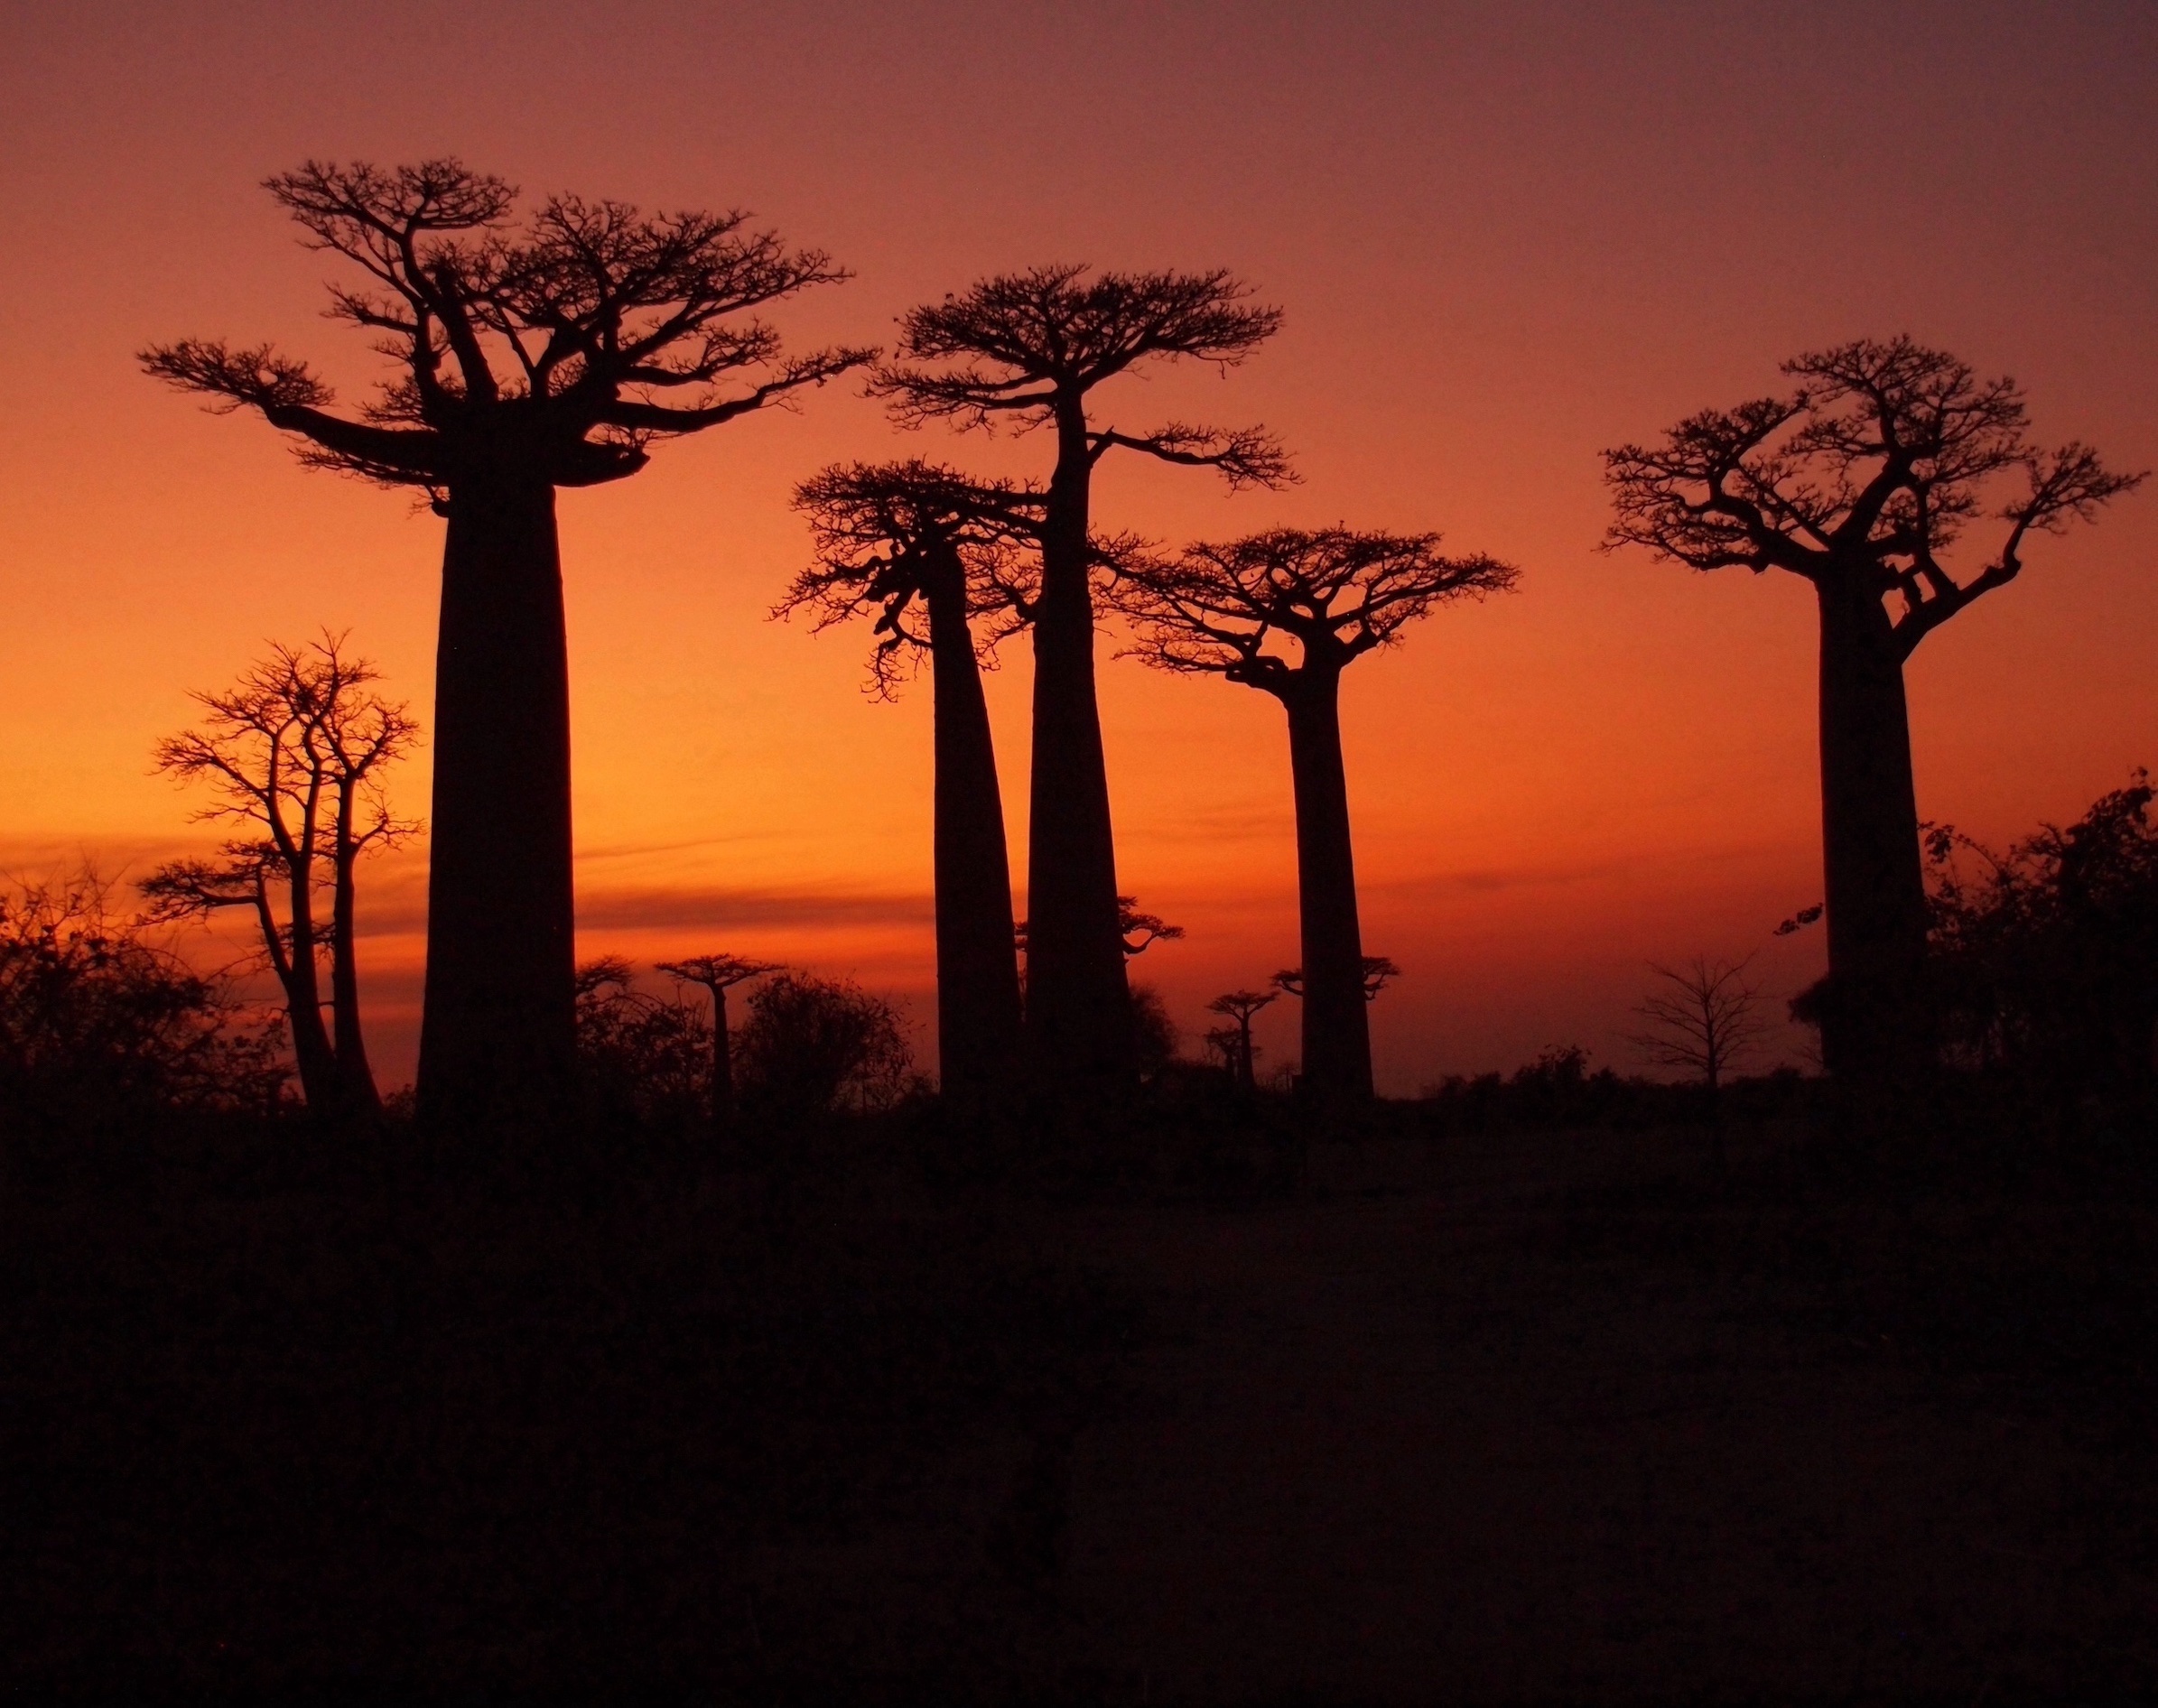 Avenue of The Baobabs